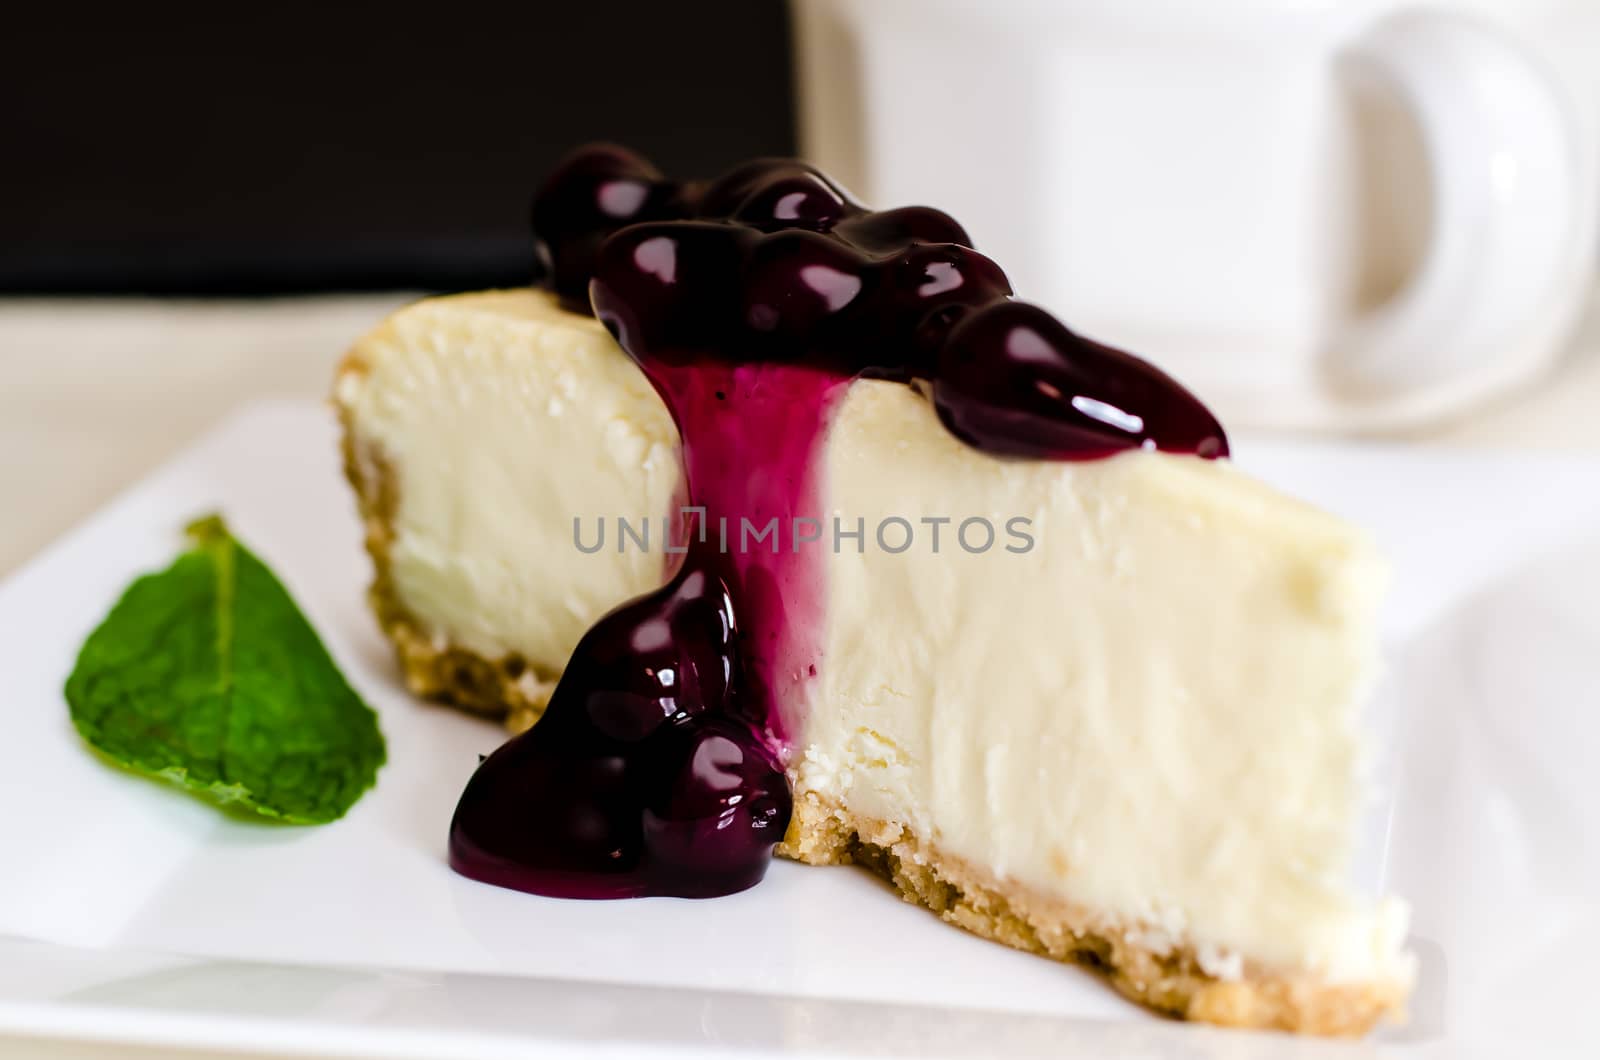 Blueberry Cheesecake and Coffee by dehooks